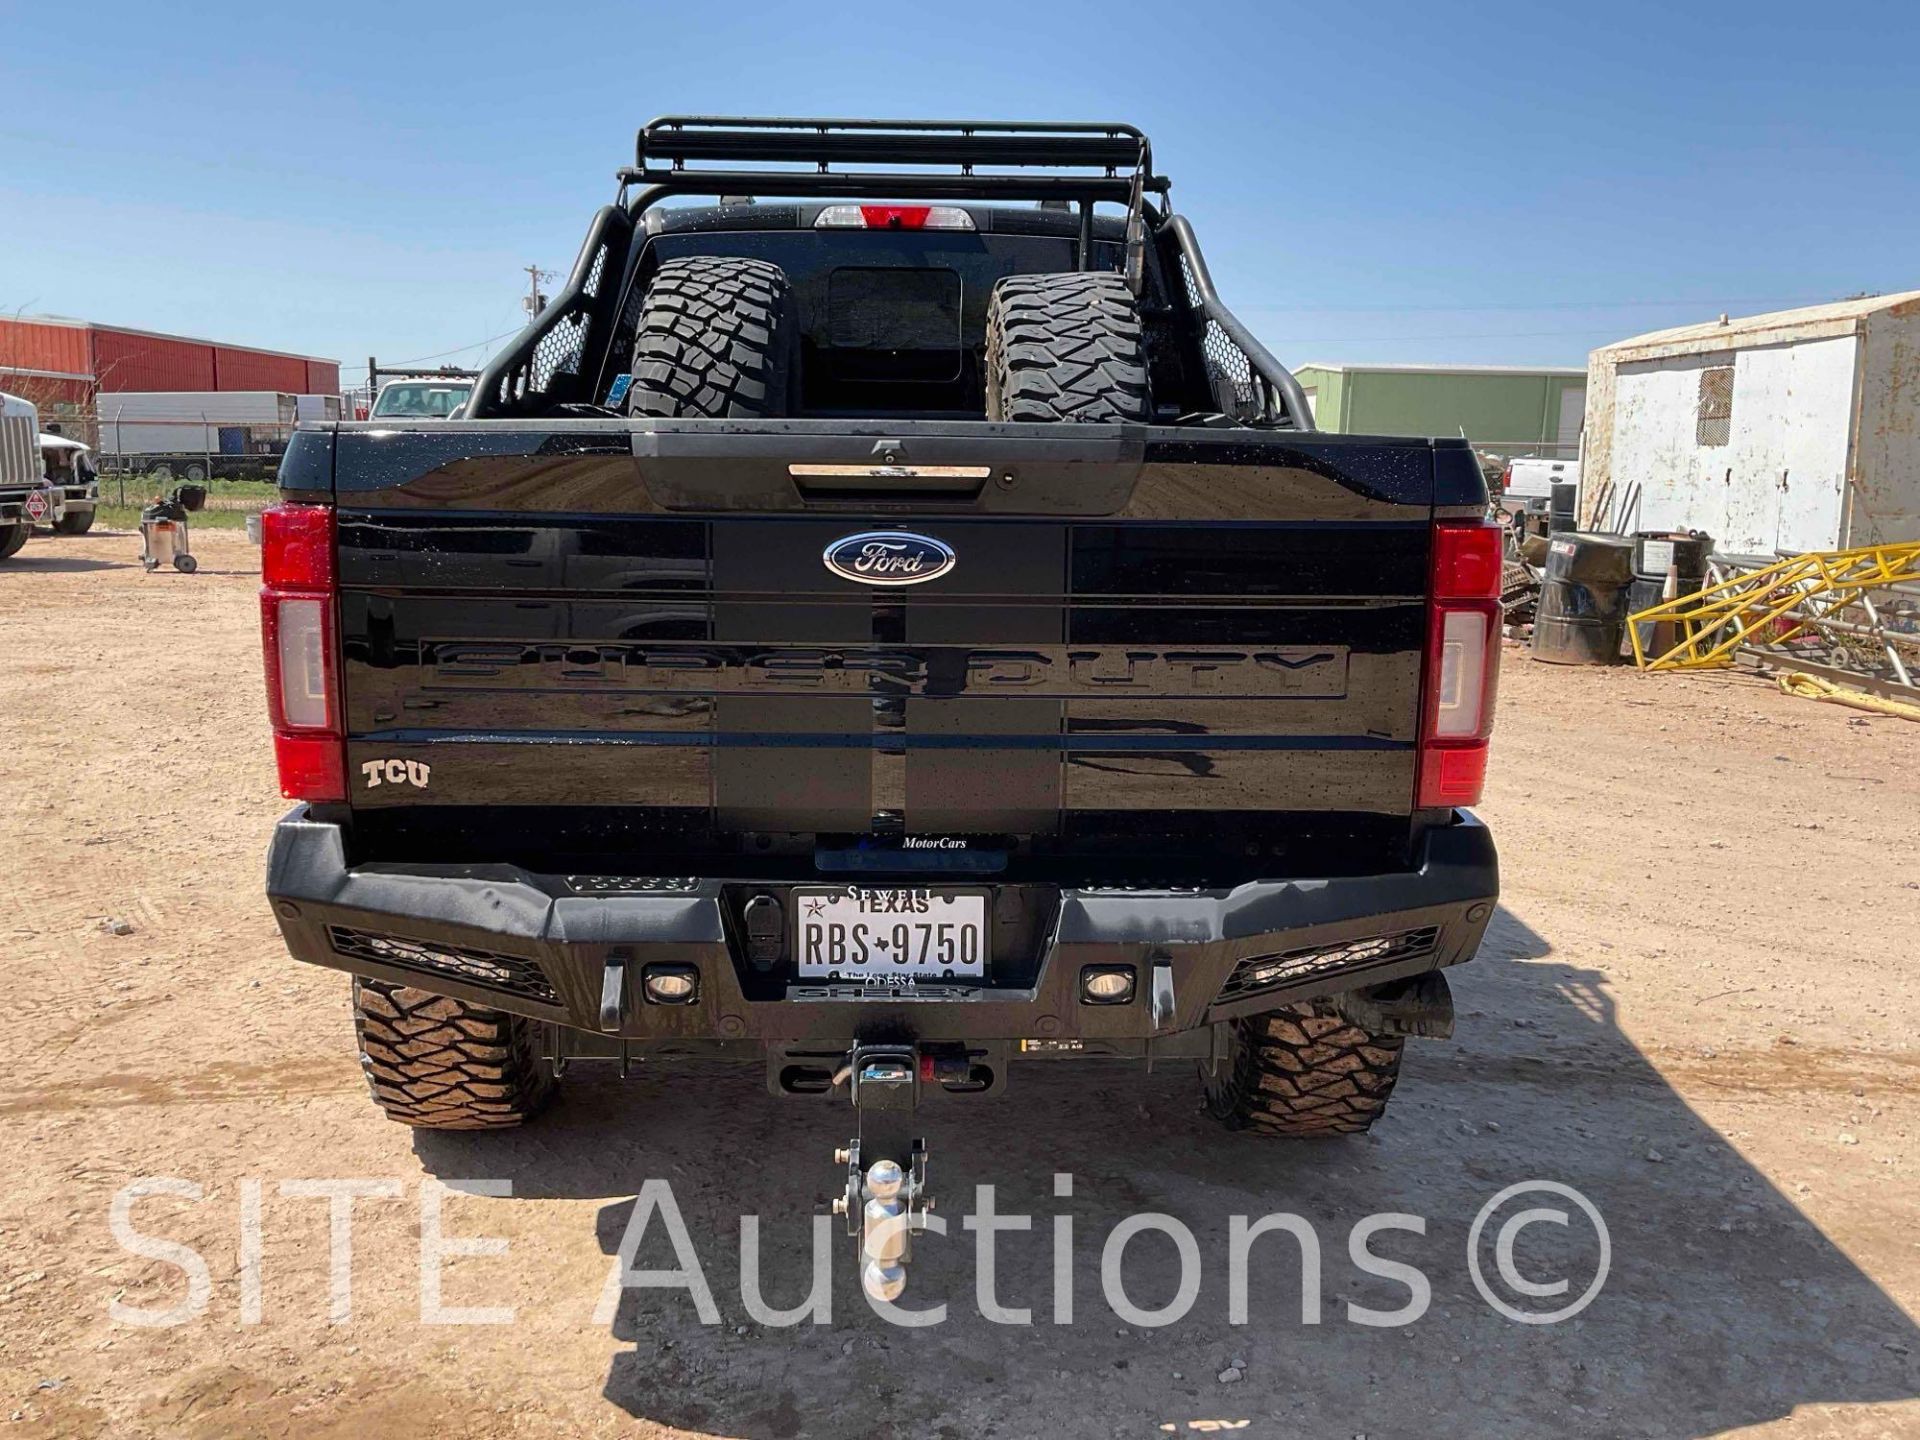 2021 Ford F250 SD Shelby Super Baja Crew Cab Pickup Truck - Image 6 of 24